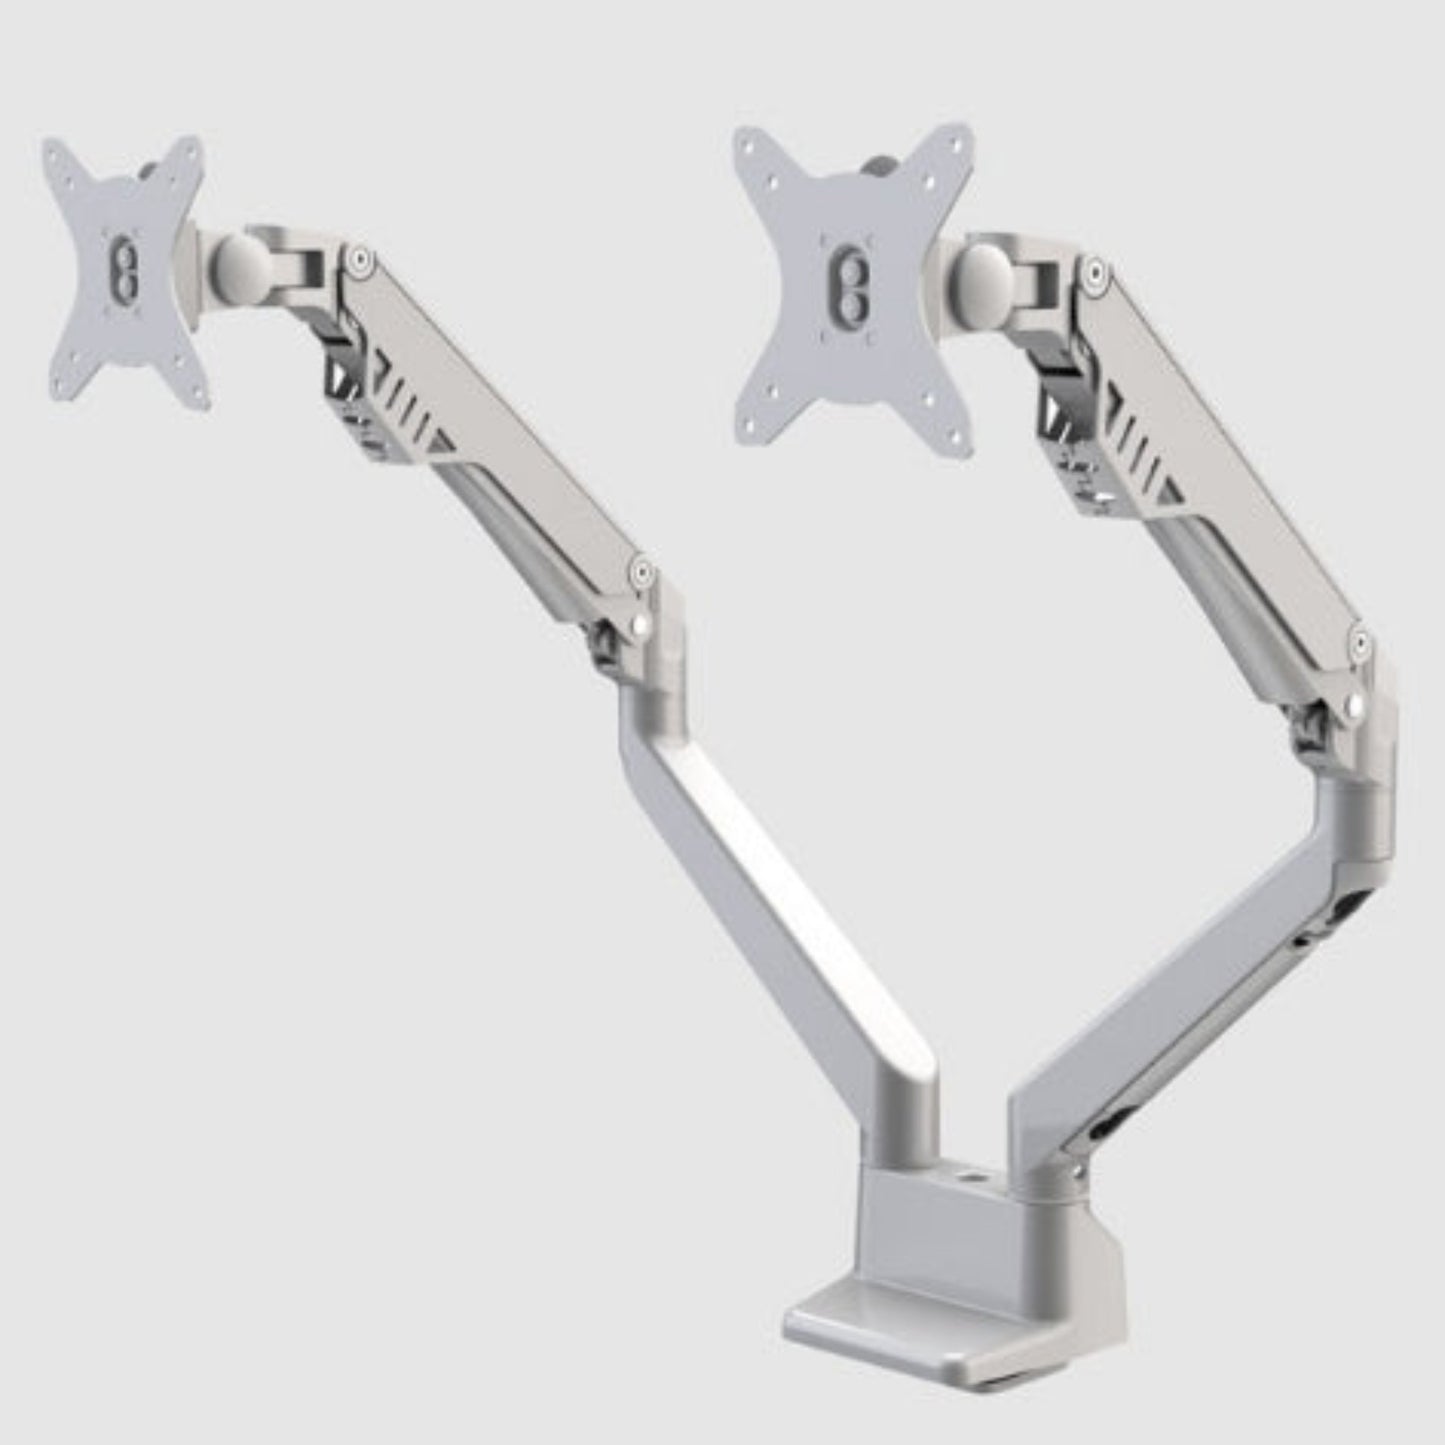 Dual monitor arm by ergoCentric